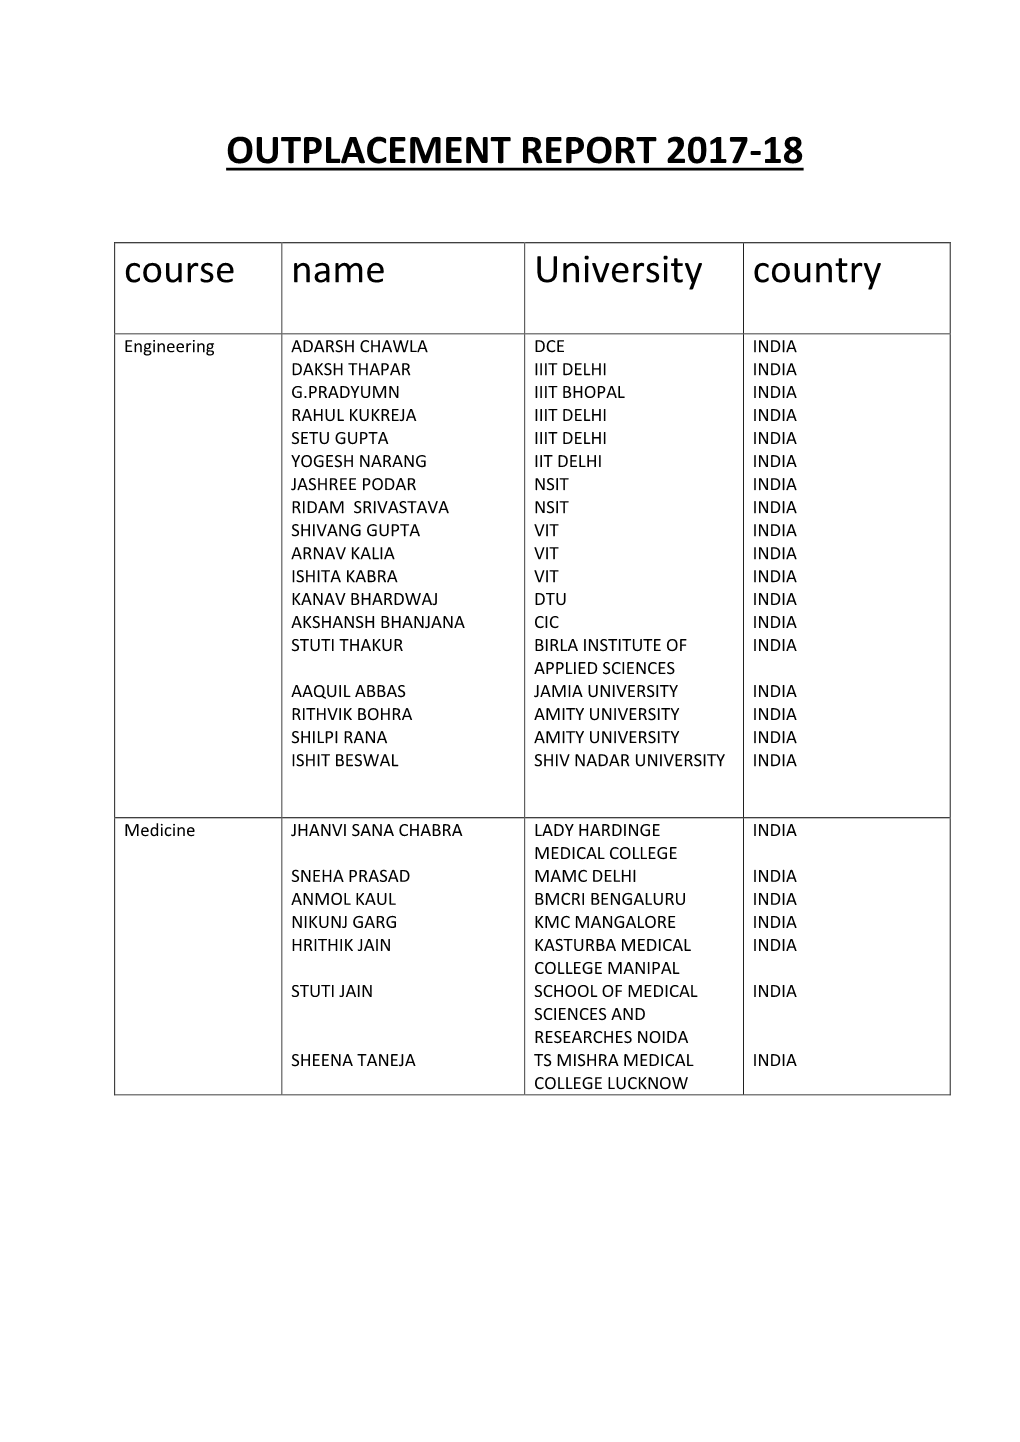 OUTPLACEMENT REPORT 2017-18 Course Name University Country